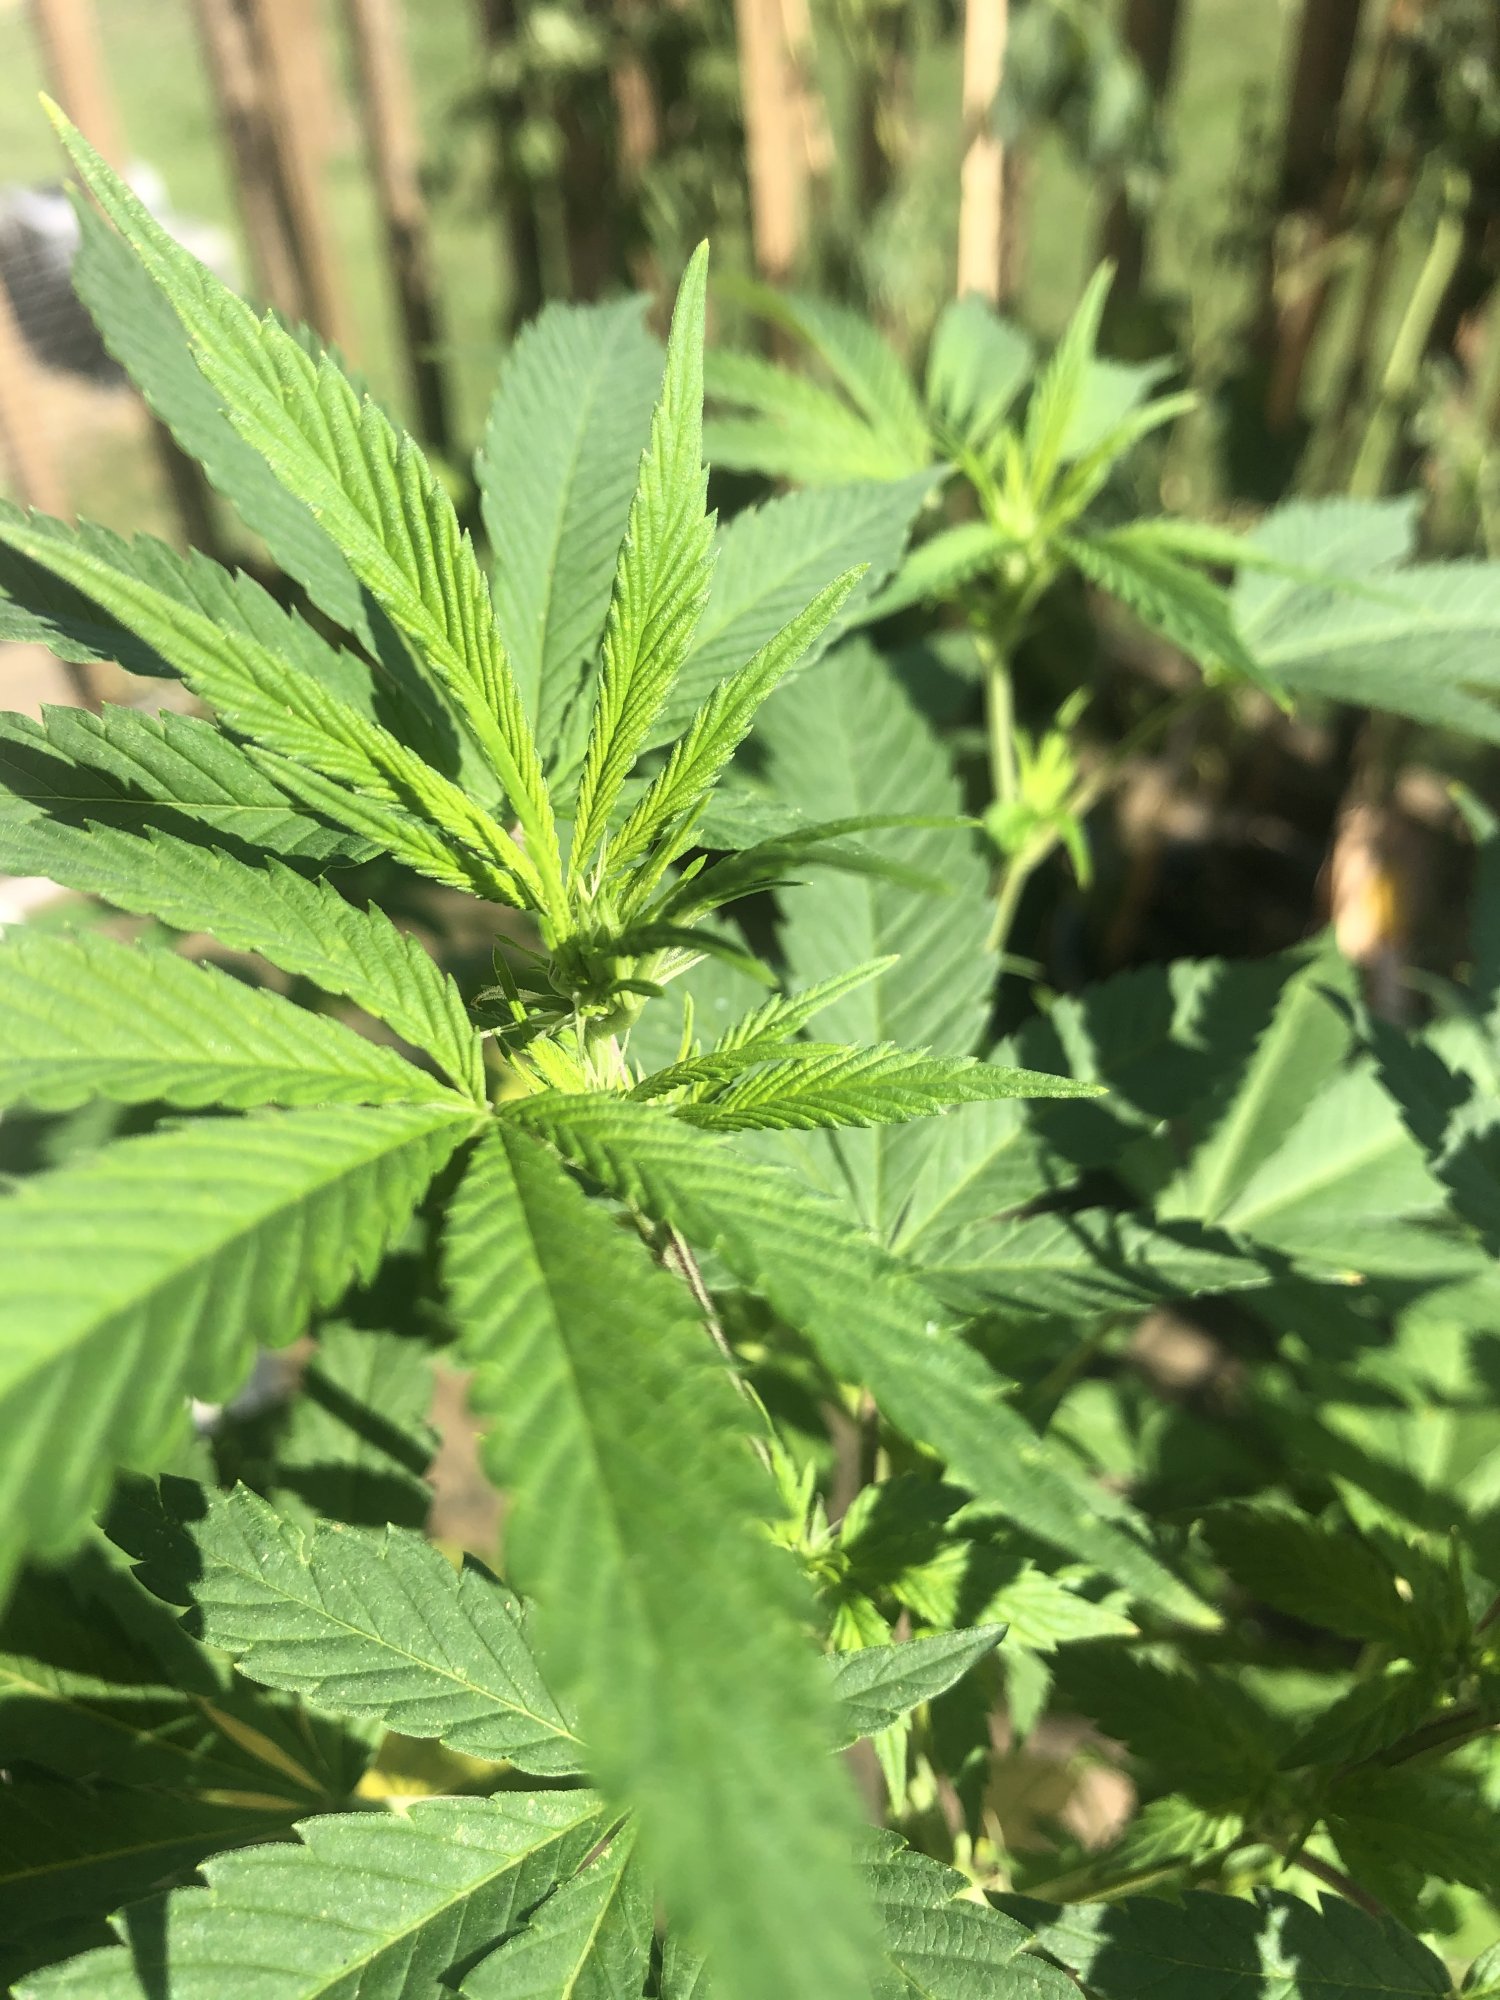 Yellowing leaves on my outdoor plant 4